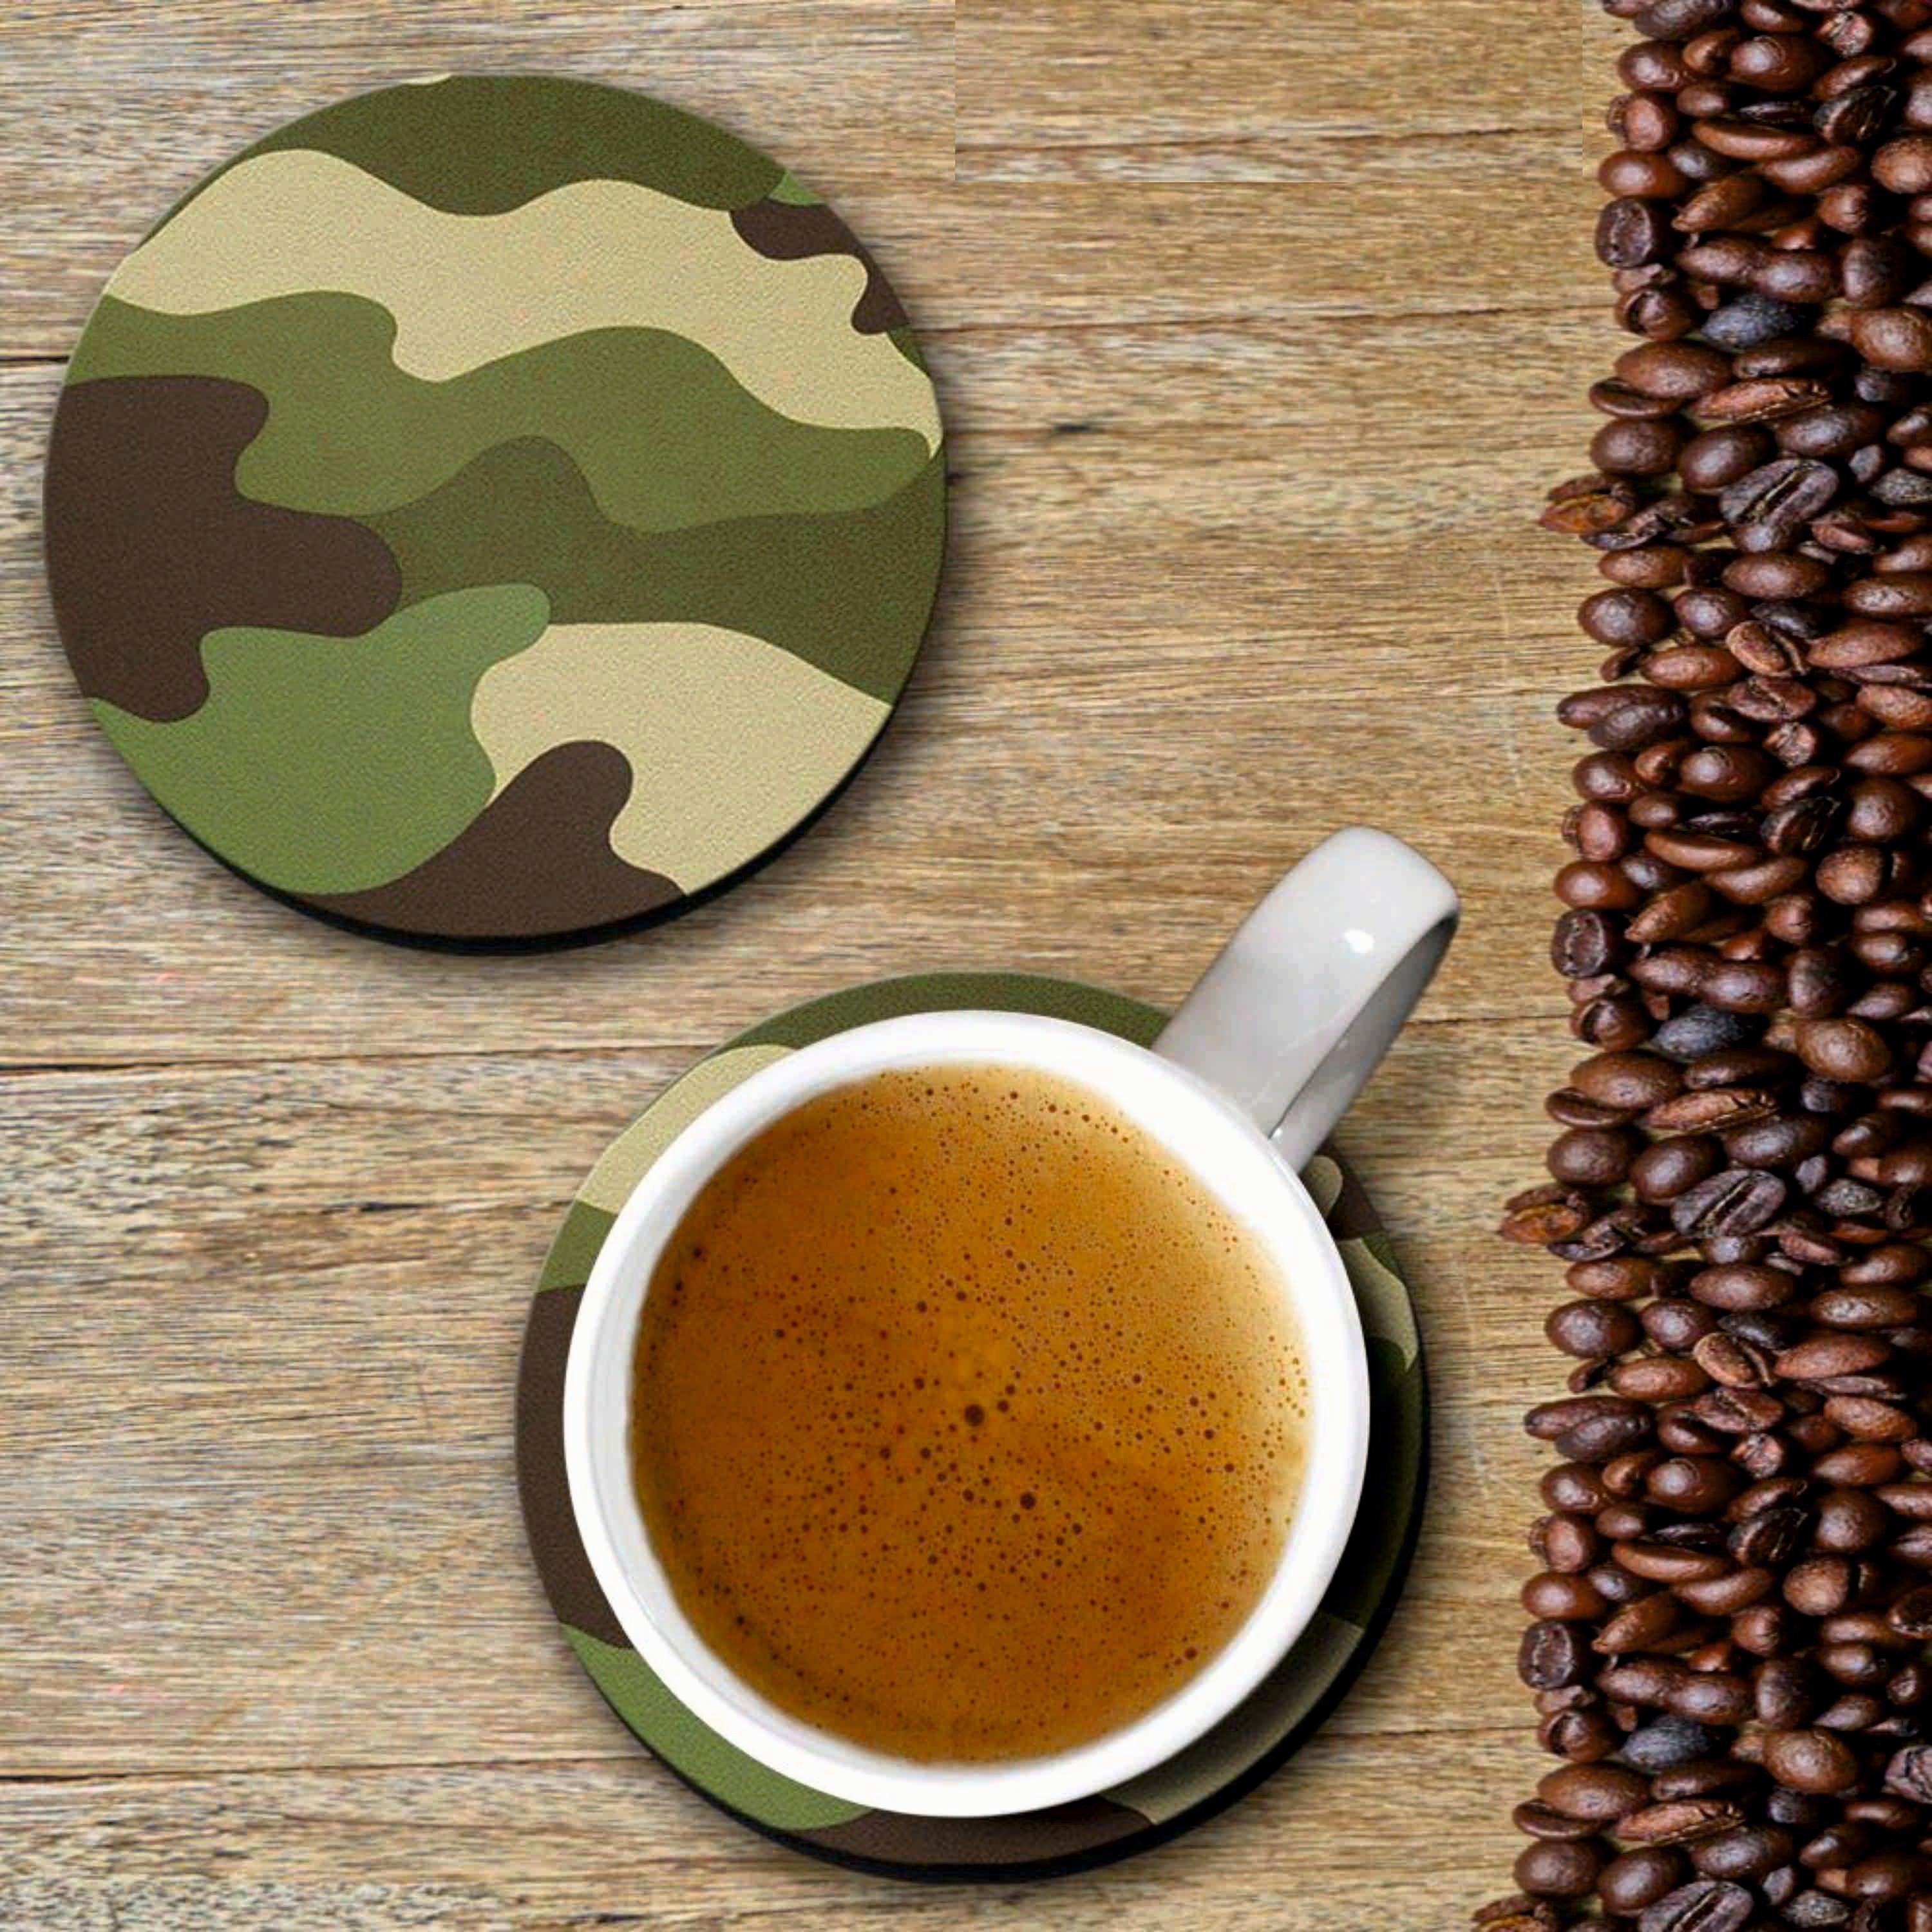 Cool Army Print - Coasters (Set of 6)